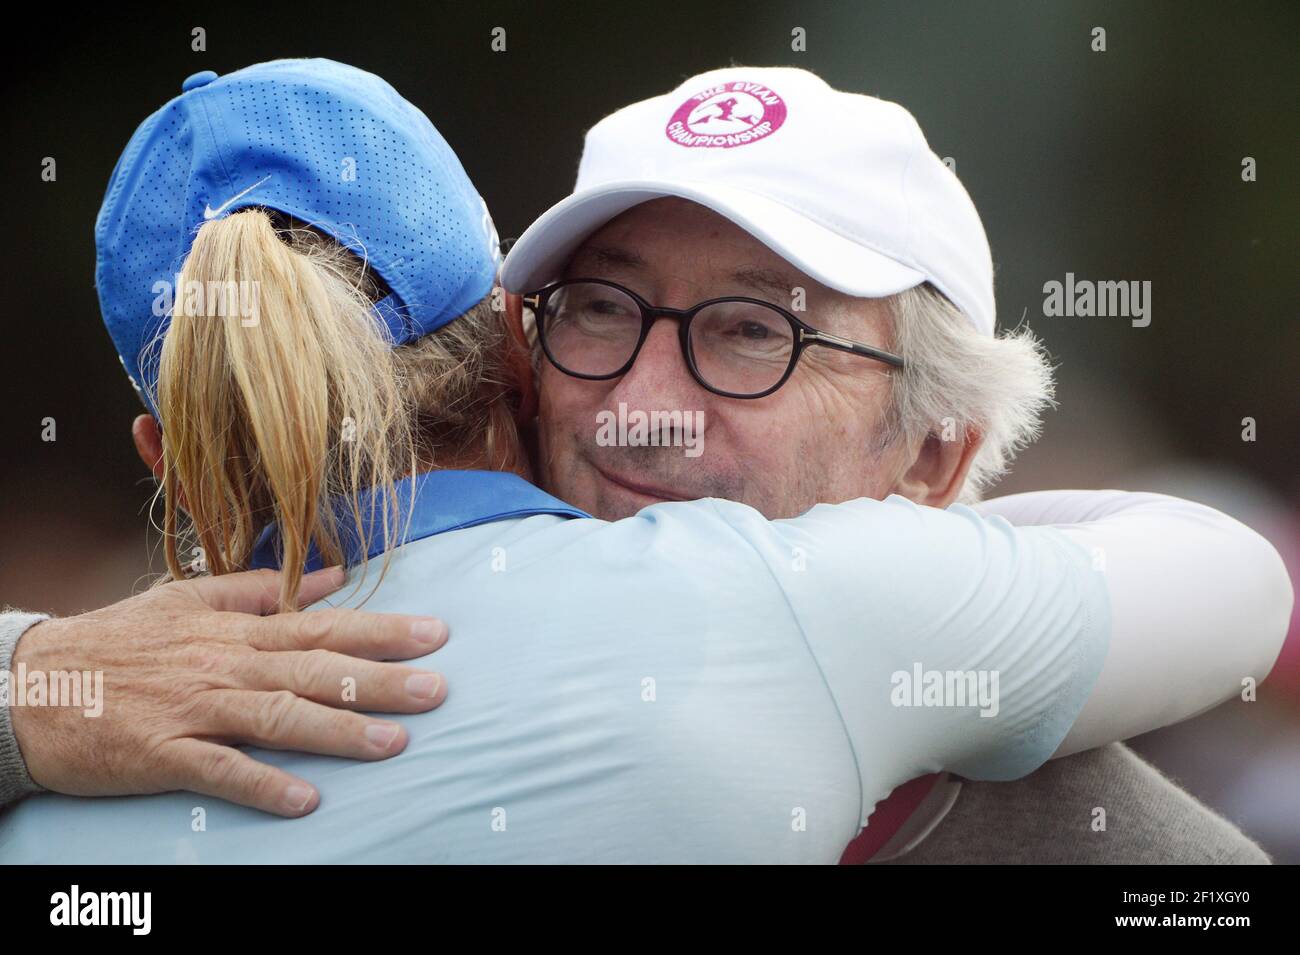 Golf - The Evian Championship 2013 - Evian - France - 9 -15/09/2013 - Photo Philippe Millereau / KMSP / DPPI - 15/09/2013 - Day 7 - Third round and final round - Suzann Pettersen / Nor - Winner and Franck Riboud / CEO Danone Stock Photo